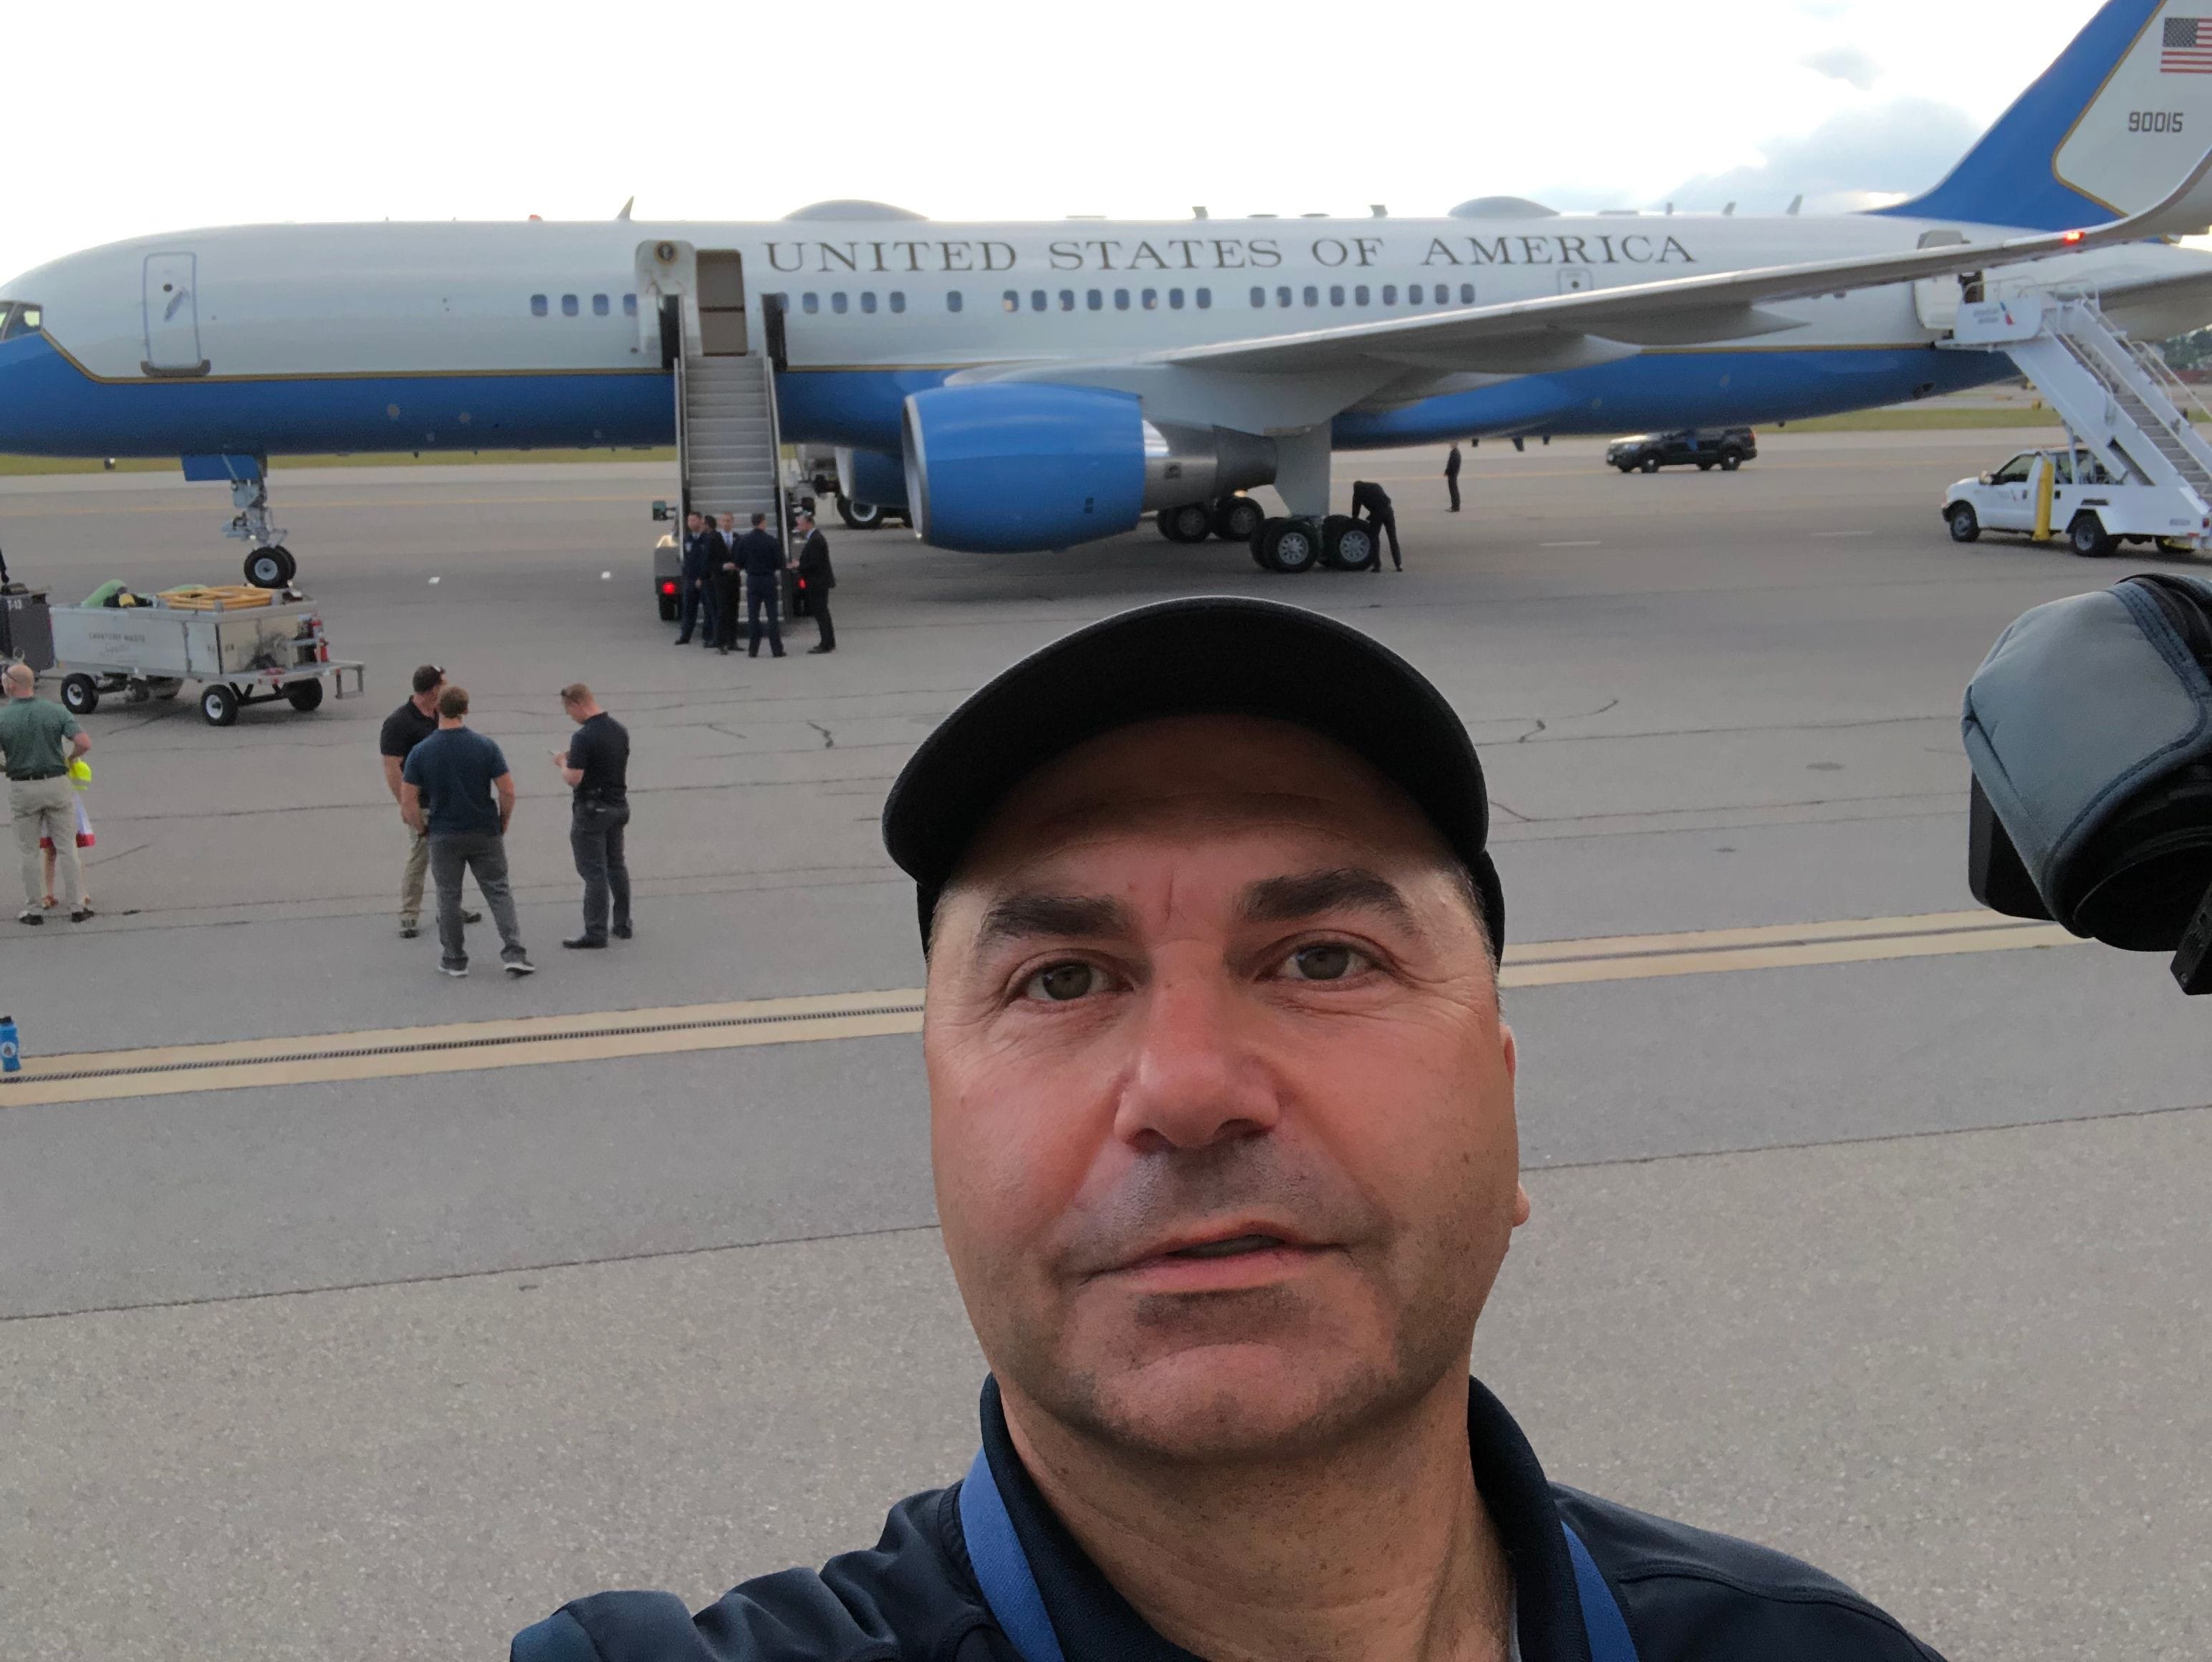 Filiming AIR FORCEONE LANDING-PresidentVisit to NH